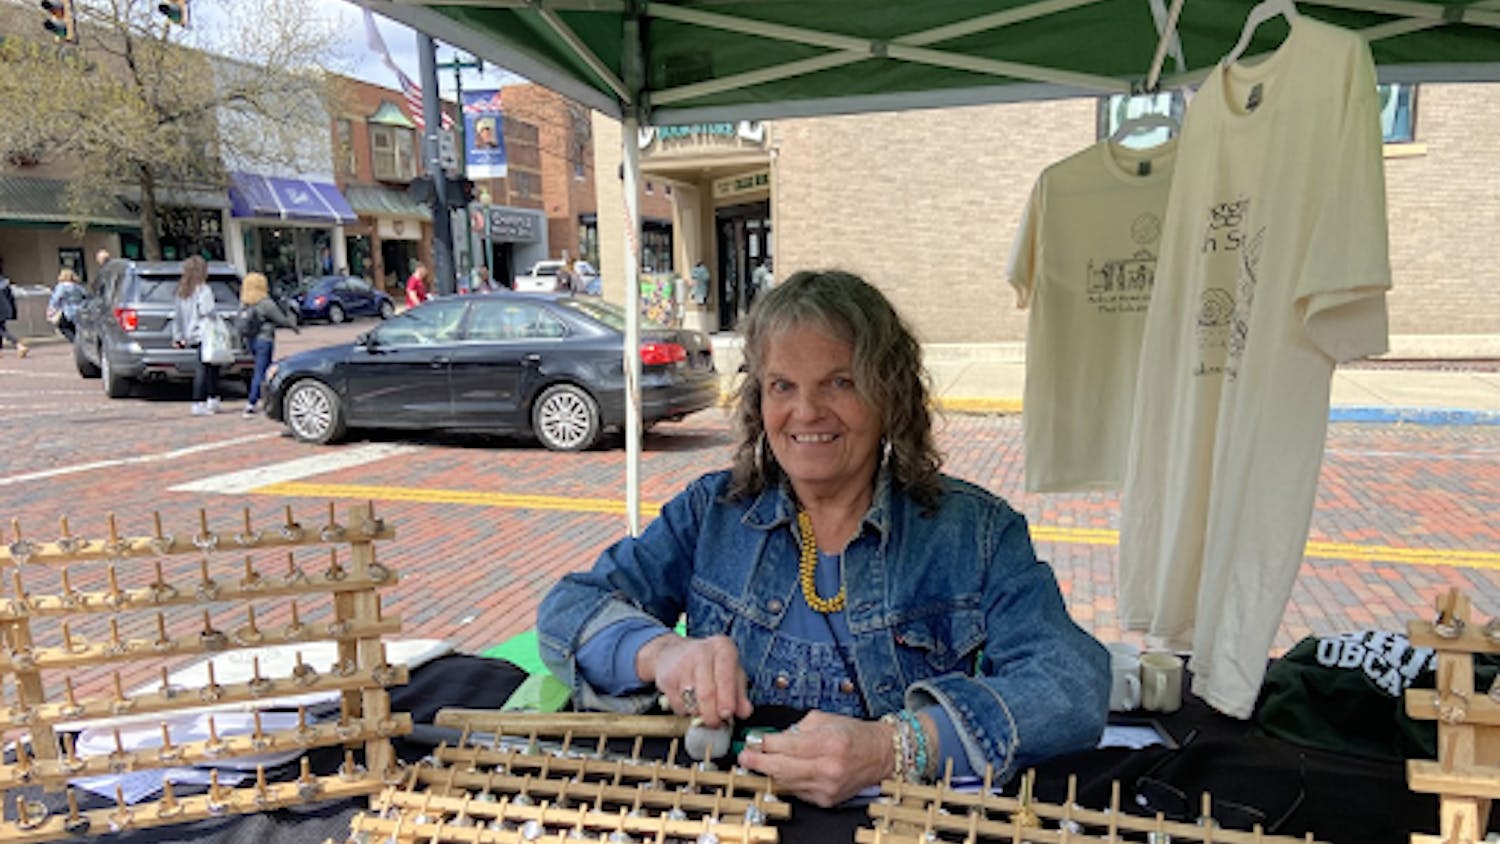 Cricket Jones set up her stand for customers on Court Street during Mom’s Weekend and sold her handmade jewelry.&nbsp;